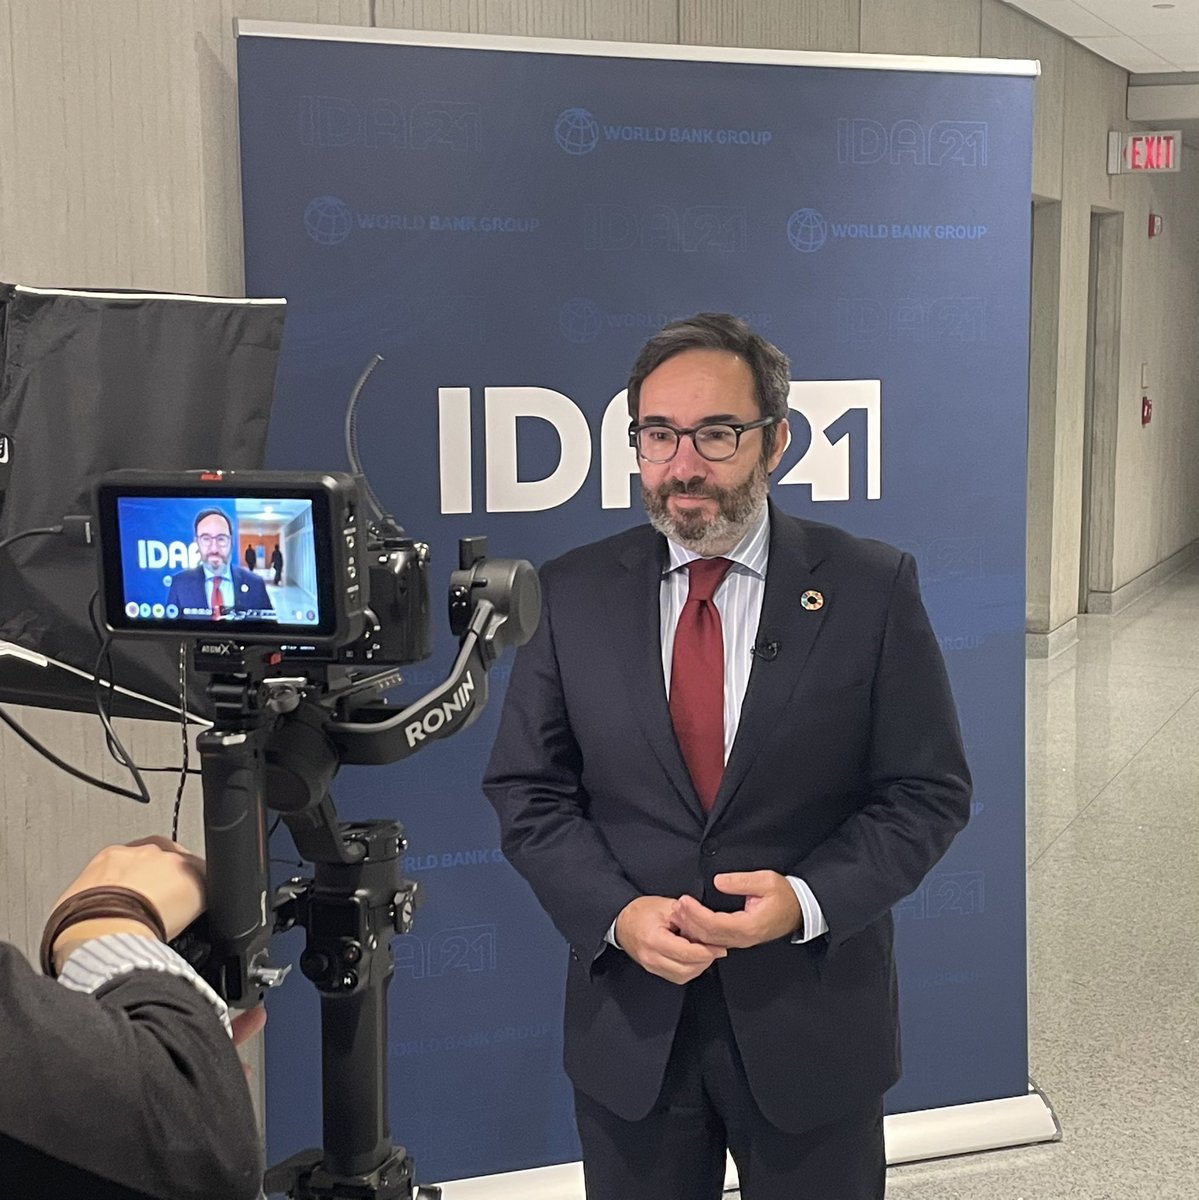 #IDAworks. That’s a key message of @UNOPS_Chief’s mission to Washington this week. Stay tuned for our video in support of the #IDA21 replenishment, and on delivering for communities in need.